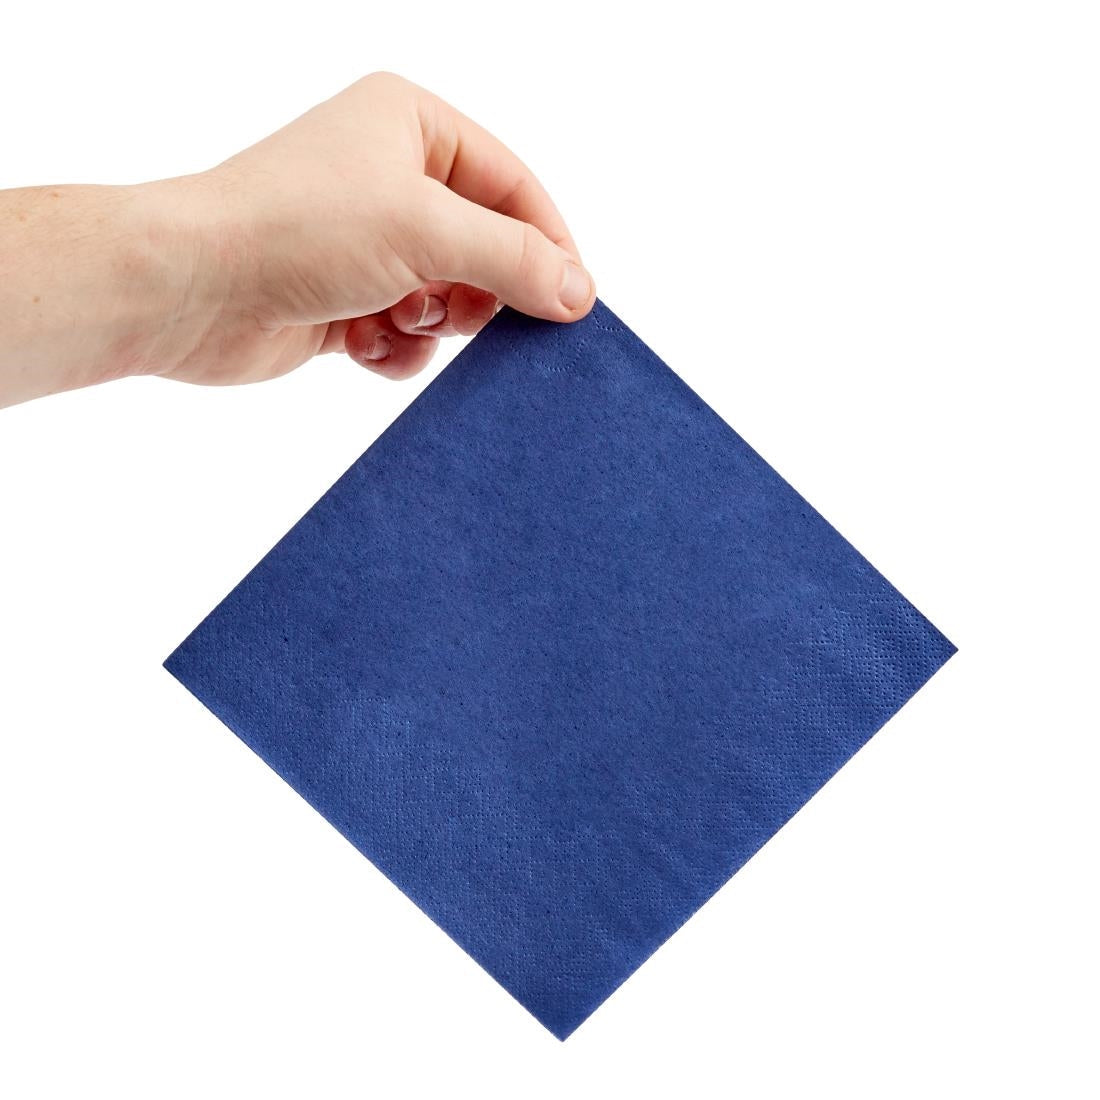 FE224 Fiesta Recyclable Lunch Napkin Blue 33x33cm 2ply 1/4 Fold (Pack of 2000) JD Catering Equipment Solutions Ltd